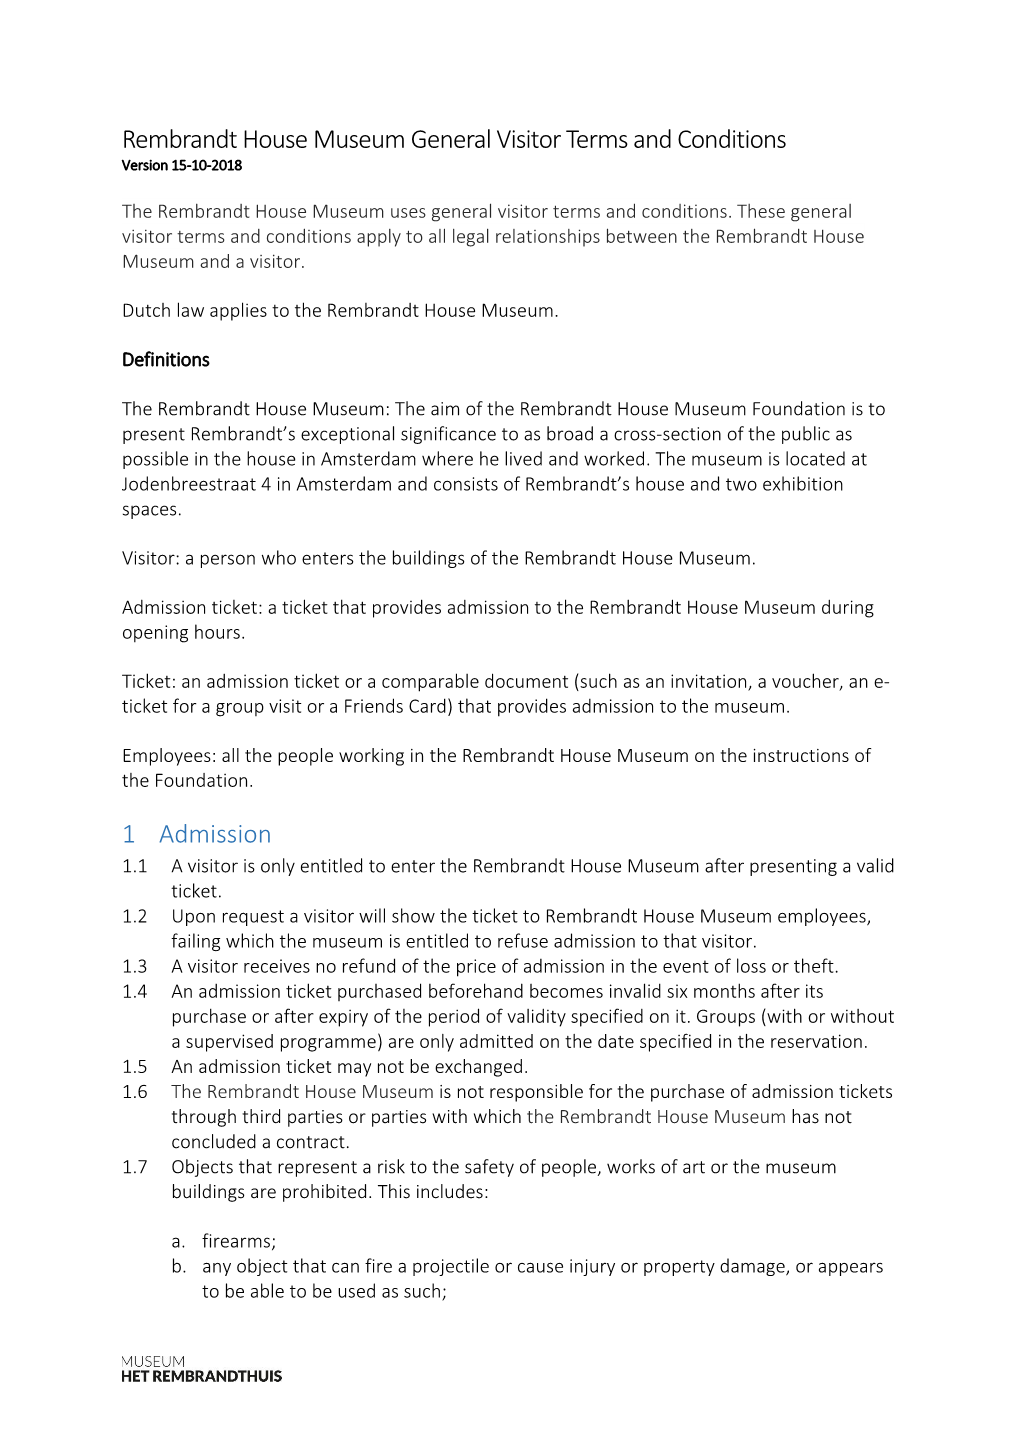 Rembrandt House Museum General Visitor Terms and Conditions Version 15-10-2018